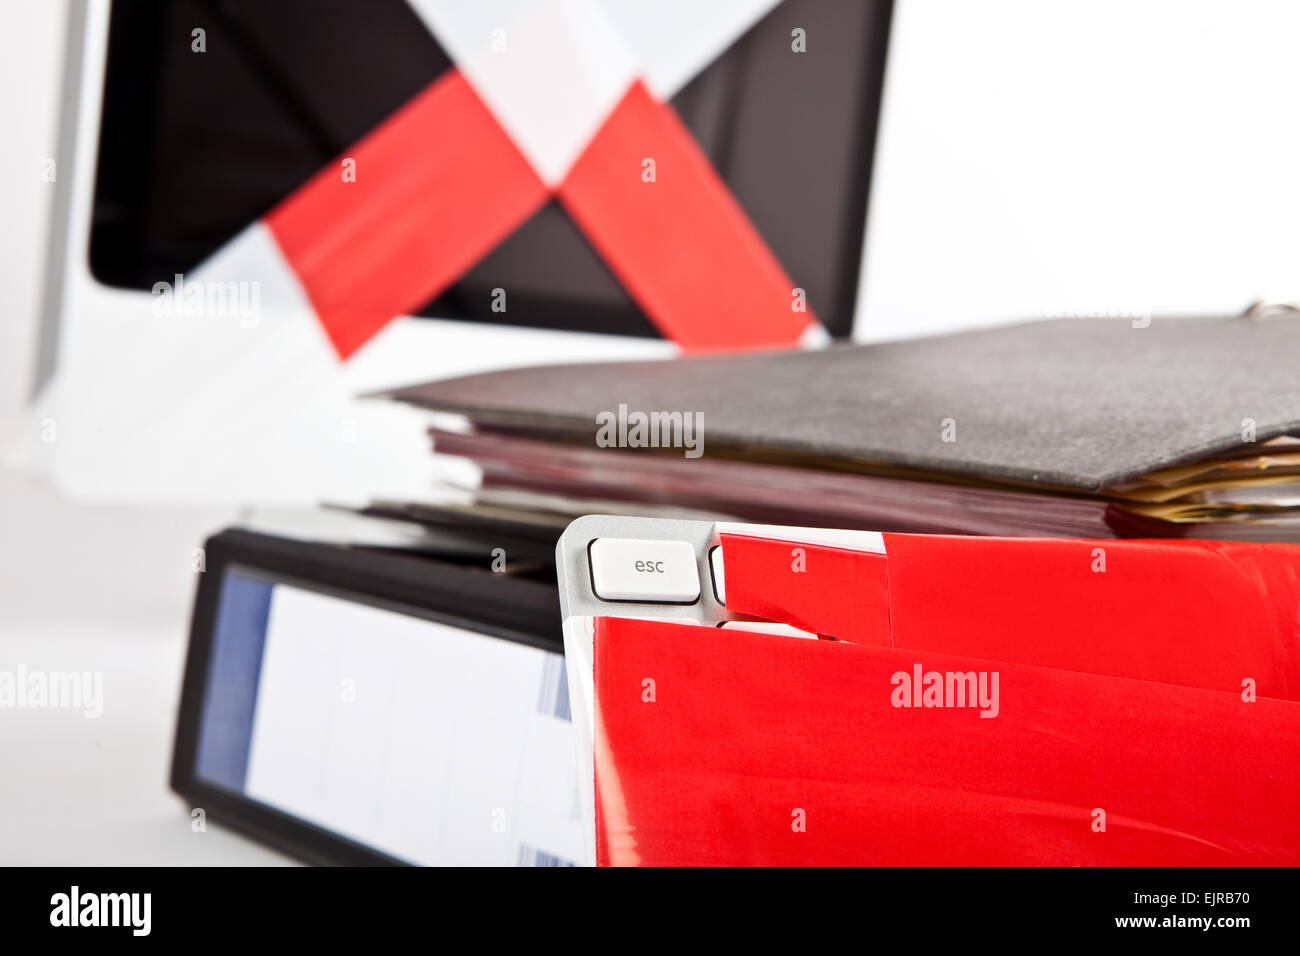 blank escape-key, keyboard and monitor wrapped in barrier tape, escape document files around, Stock Photo